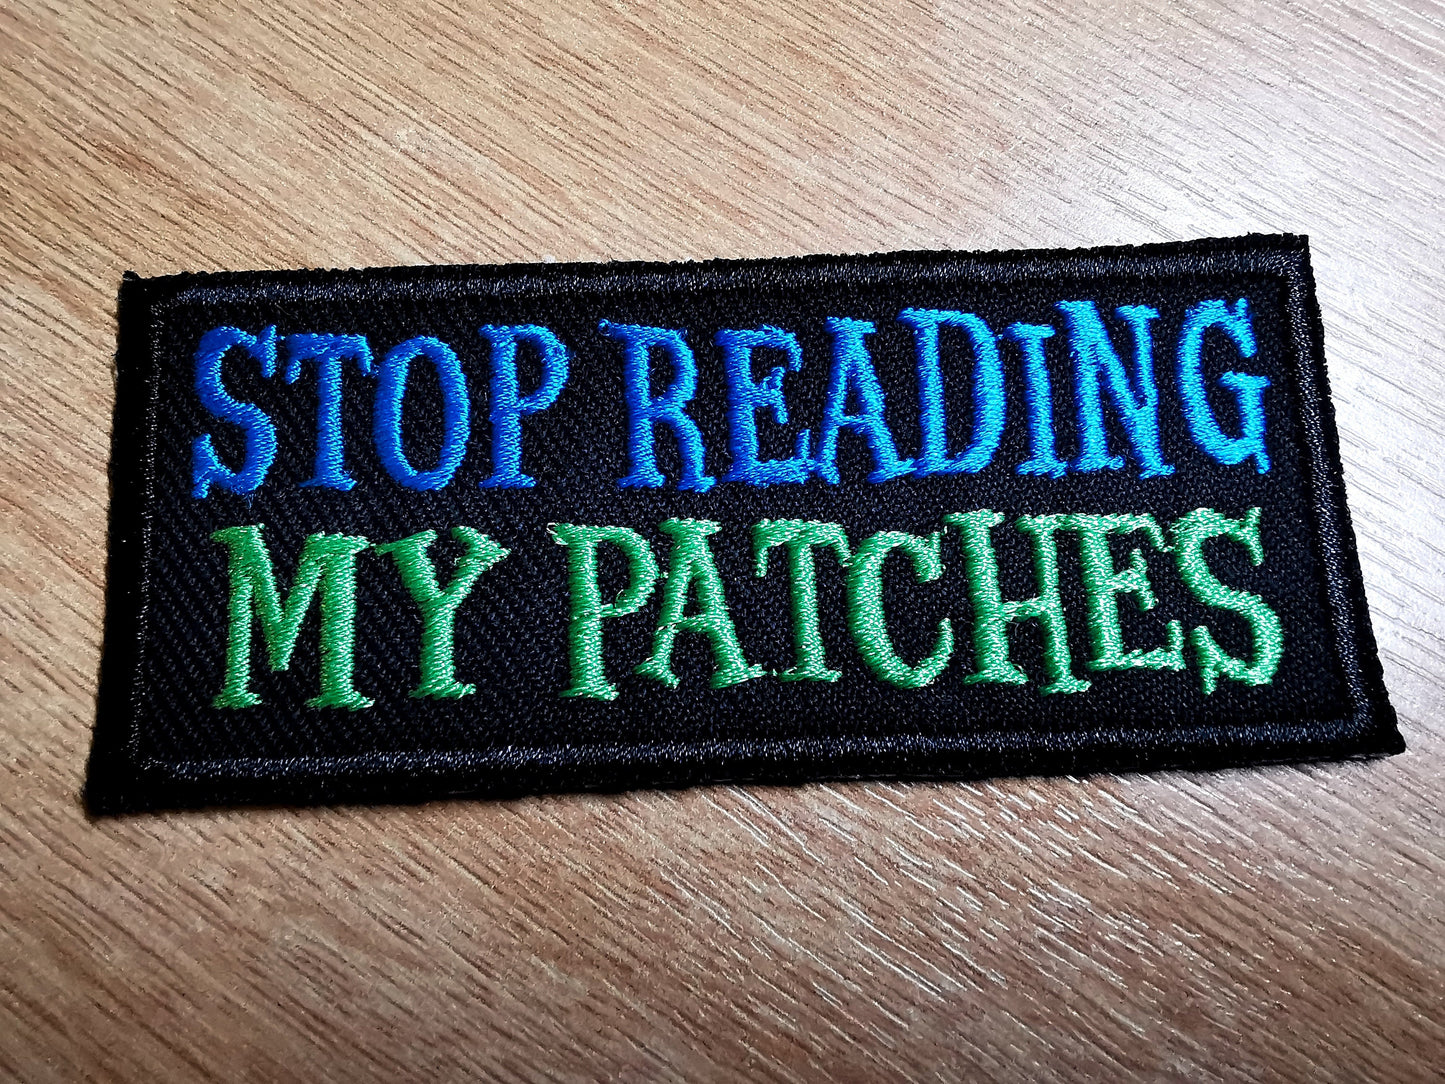 Stop Reading My Patches Funny Embroidered Patch Sarcastic Iron on Patch